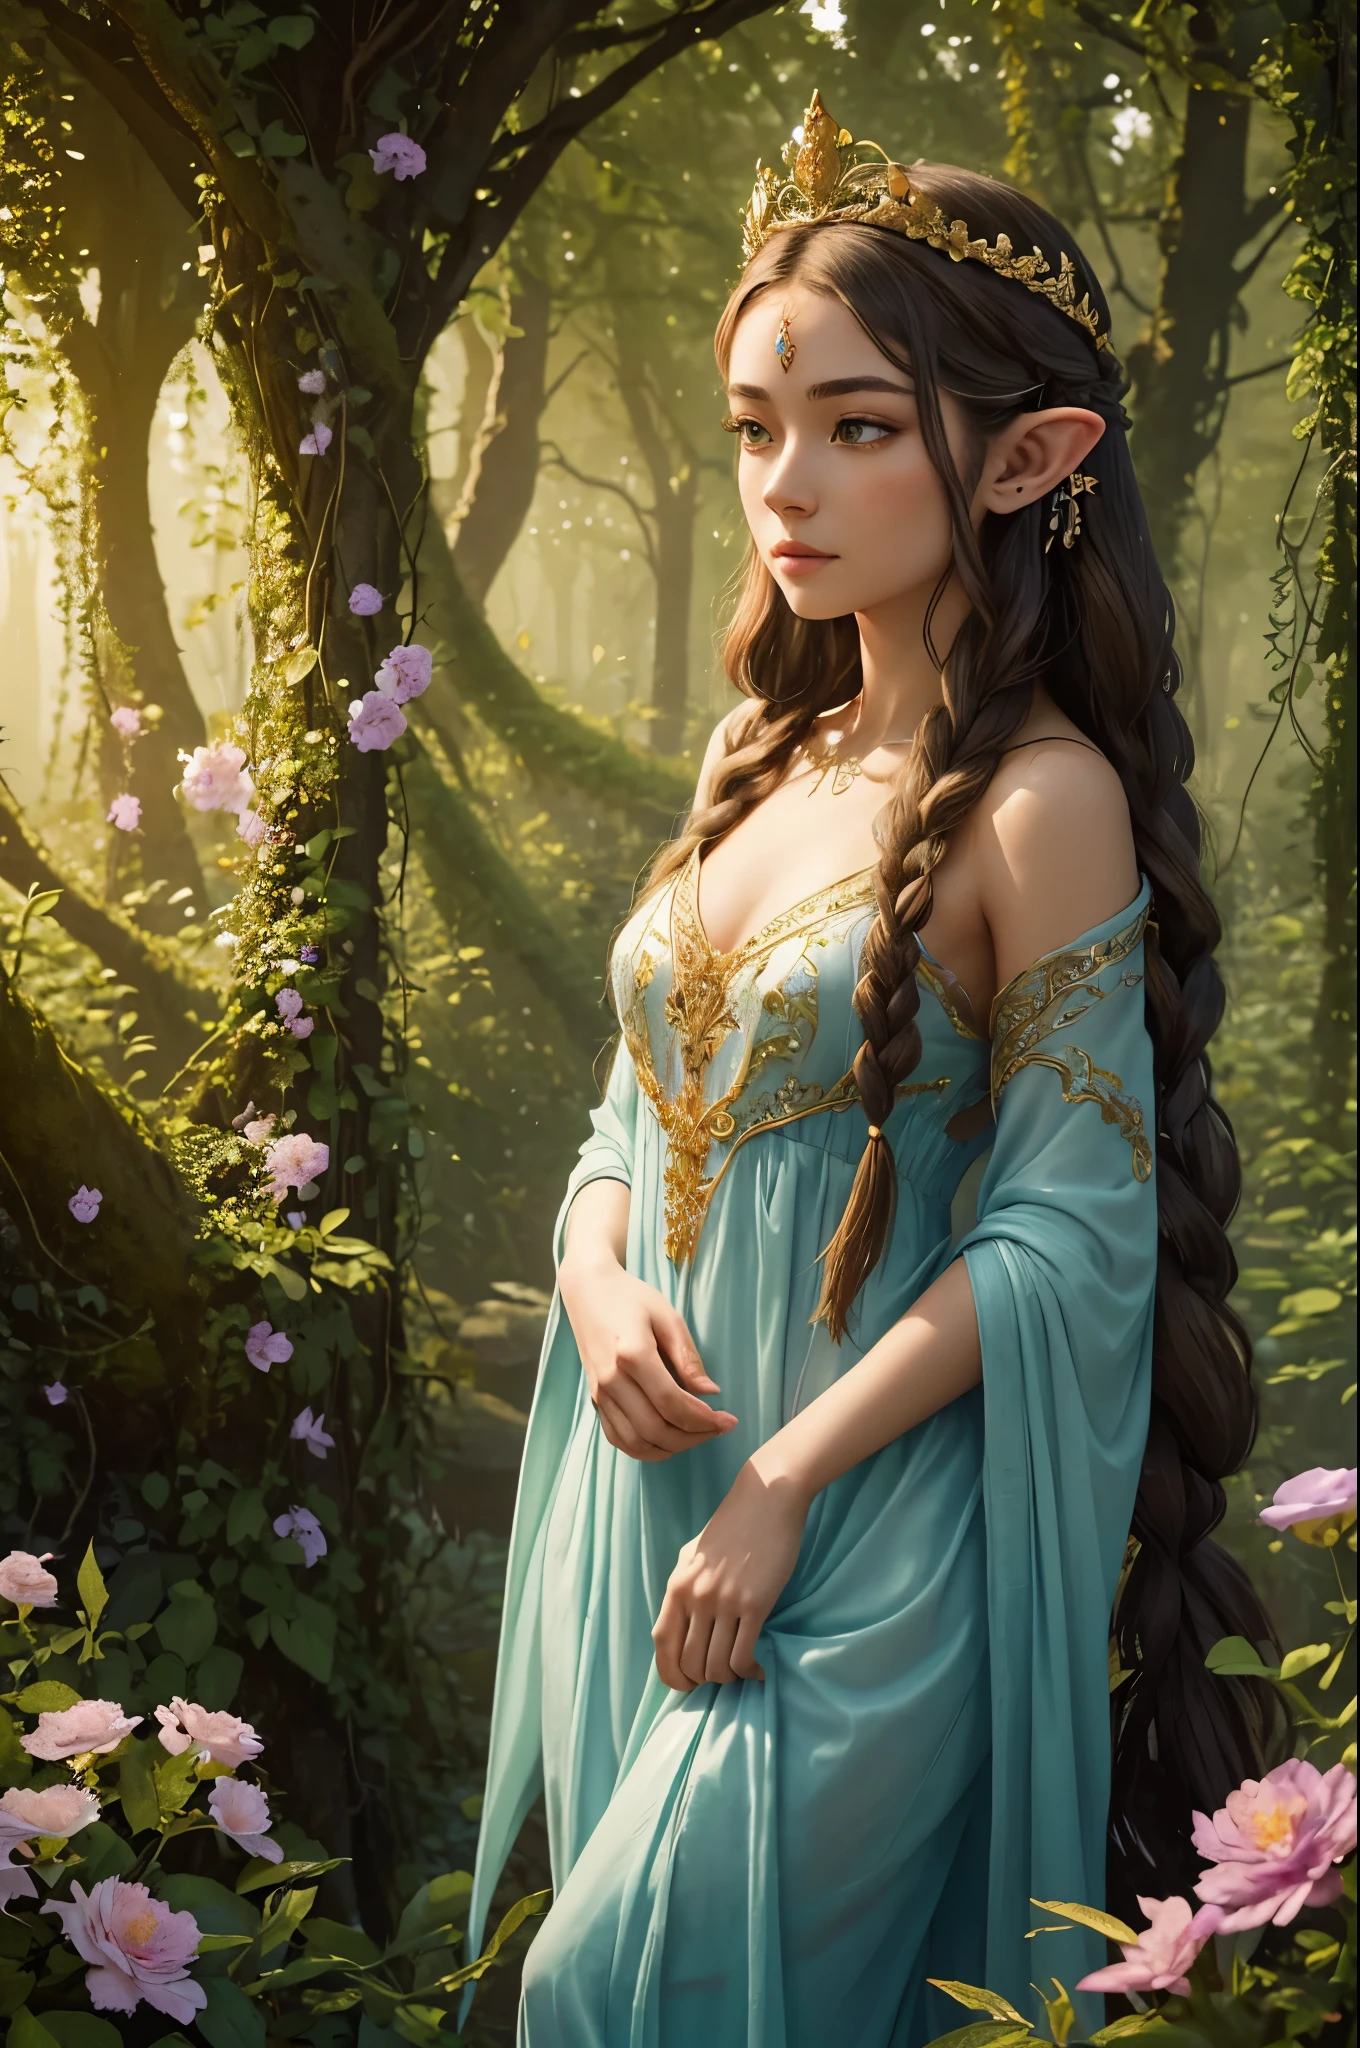 A beautiful girl with pointed ears and elegant features,
soft glowing eyes,
long flowing hair with intricate braids,
delicate facial tattoos that shimmer in the light,
wearing a crown made of vibrant flowers,
dressed in a flowing gown made of ethereal fabric,
standing in a magical forest bathed in golden sunlight,
surrounded by blooming flowers and enchanting creatures,
capturing the essence of a mystical realm,
evoking a sense of tranquility and enchantment,
created with the medium of oil painting,
best quality and ultra-detailed,
realistic and photorealistic,
with vivid colors and sharp focus,
enhanced by the use of studio lighting,
from an elven art book,
with a color palette of earthy tones and soft pastels,
illuminated by the warm glow of the setting sun.